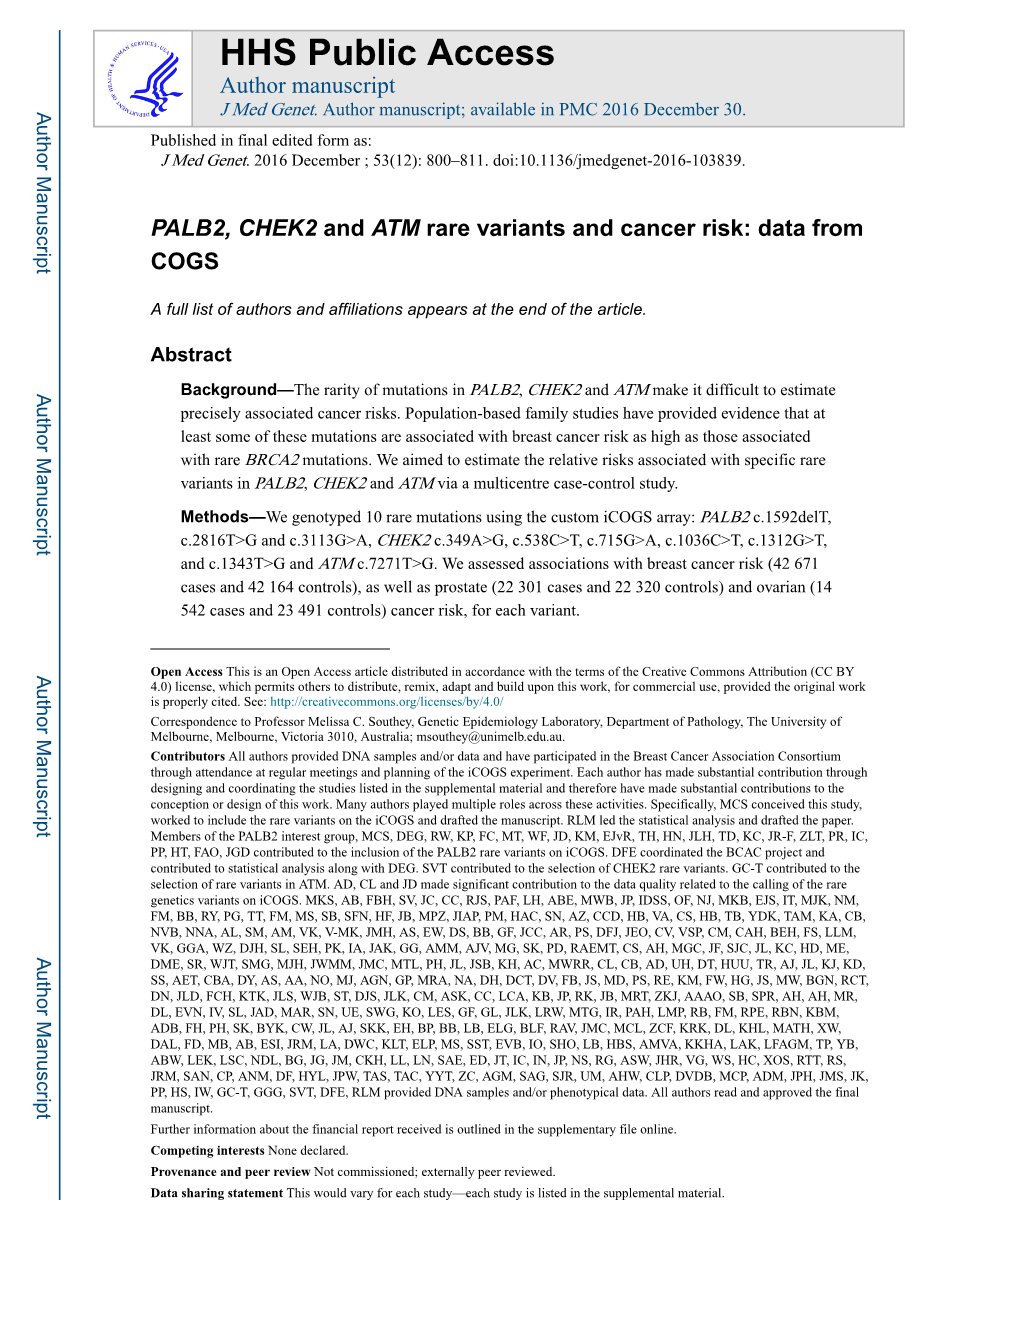 PALB2, CHEK2 and ATM Rare Variants and Cancer Risk: Data from COGS